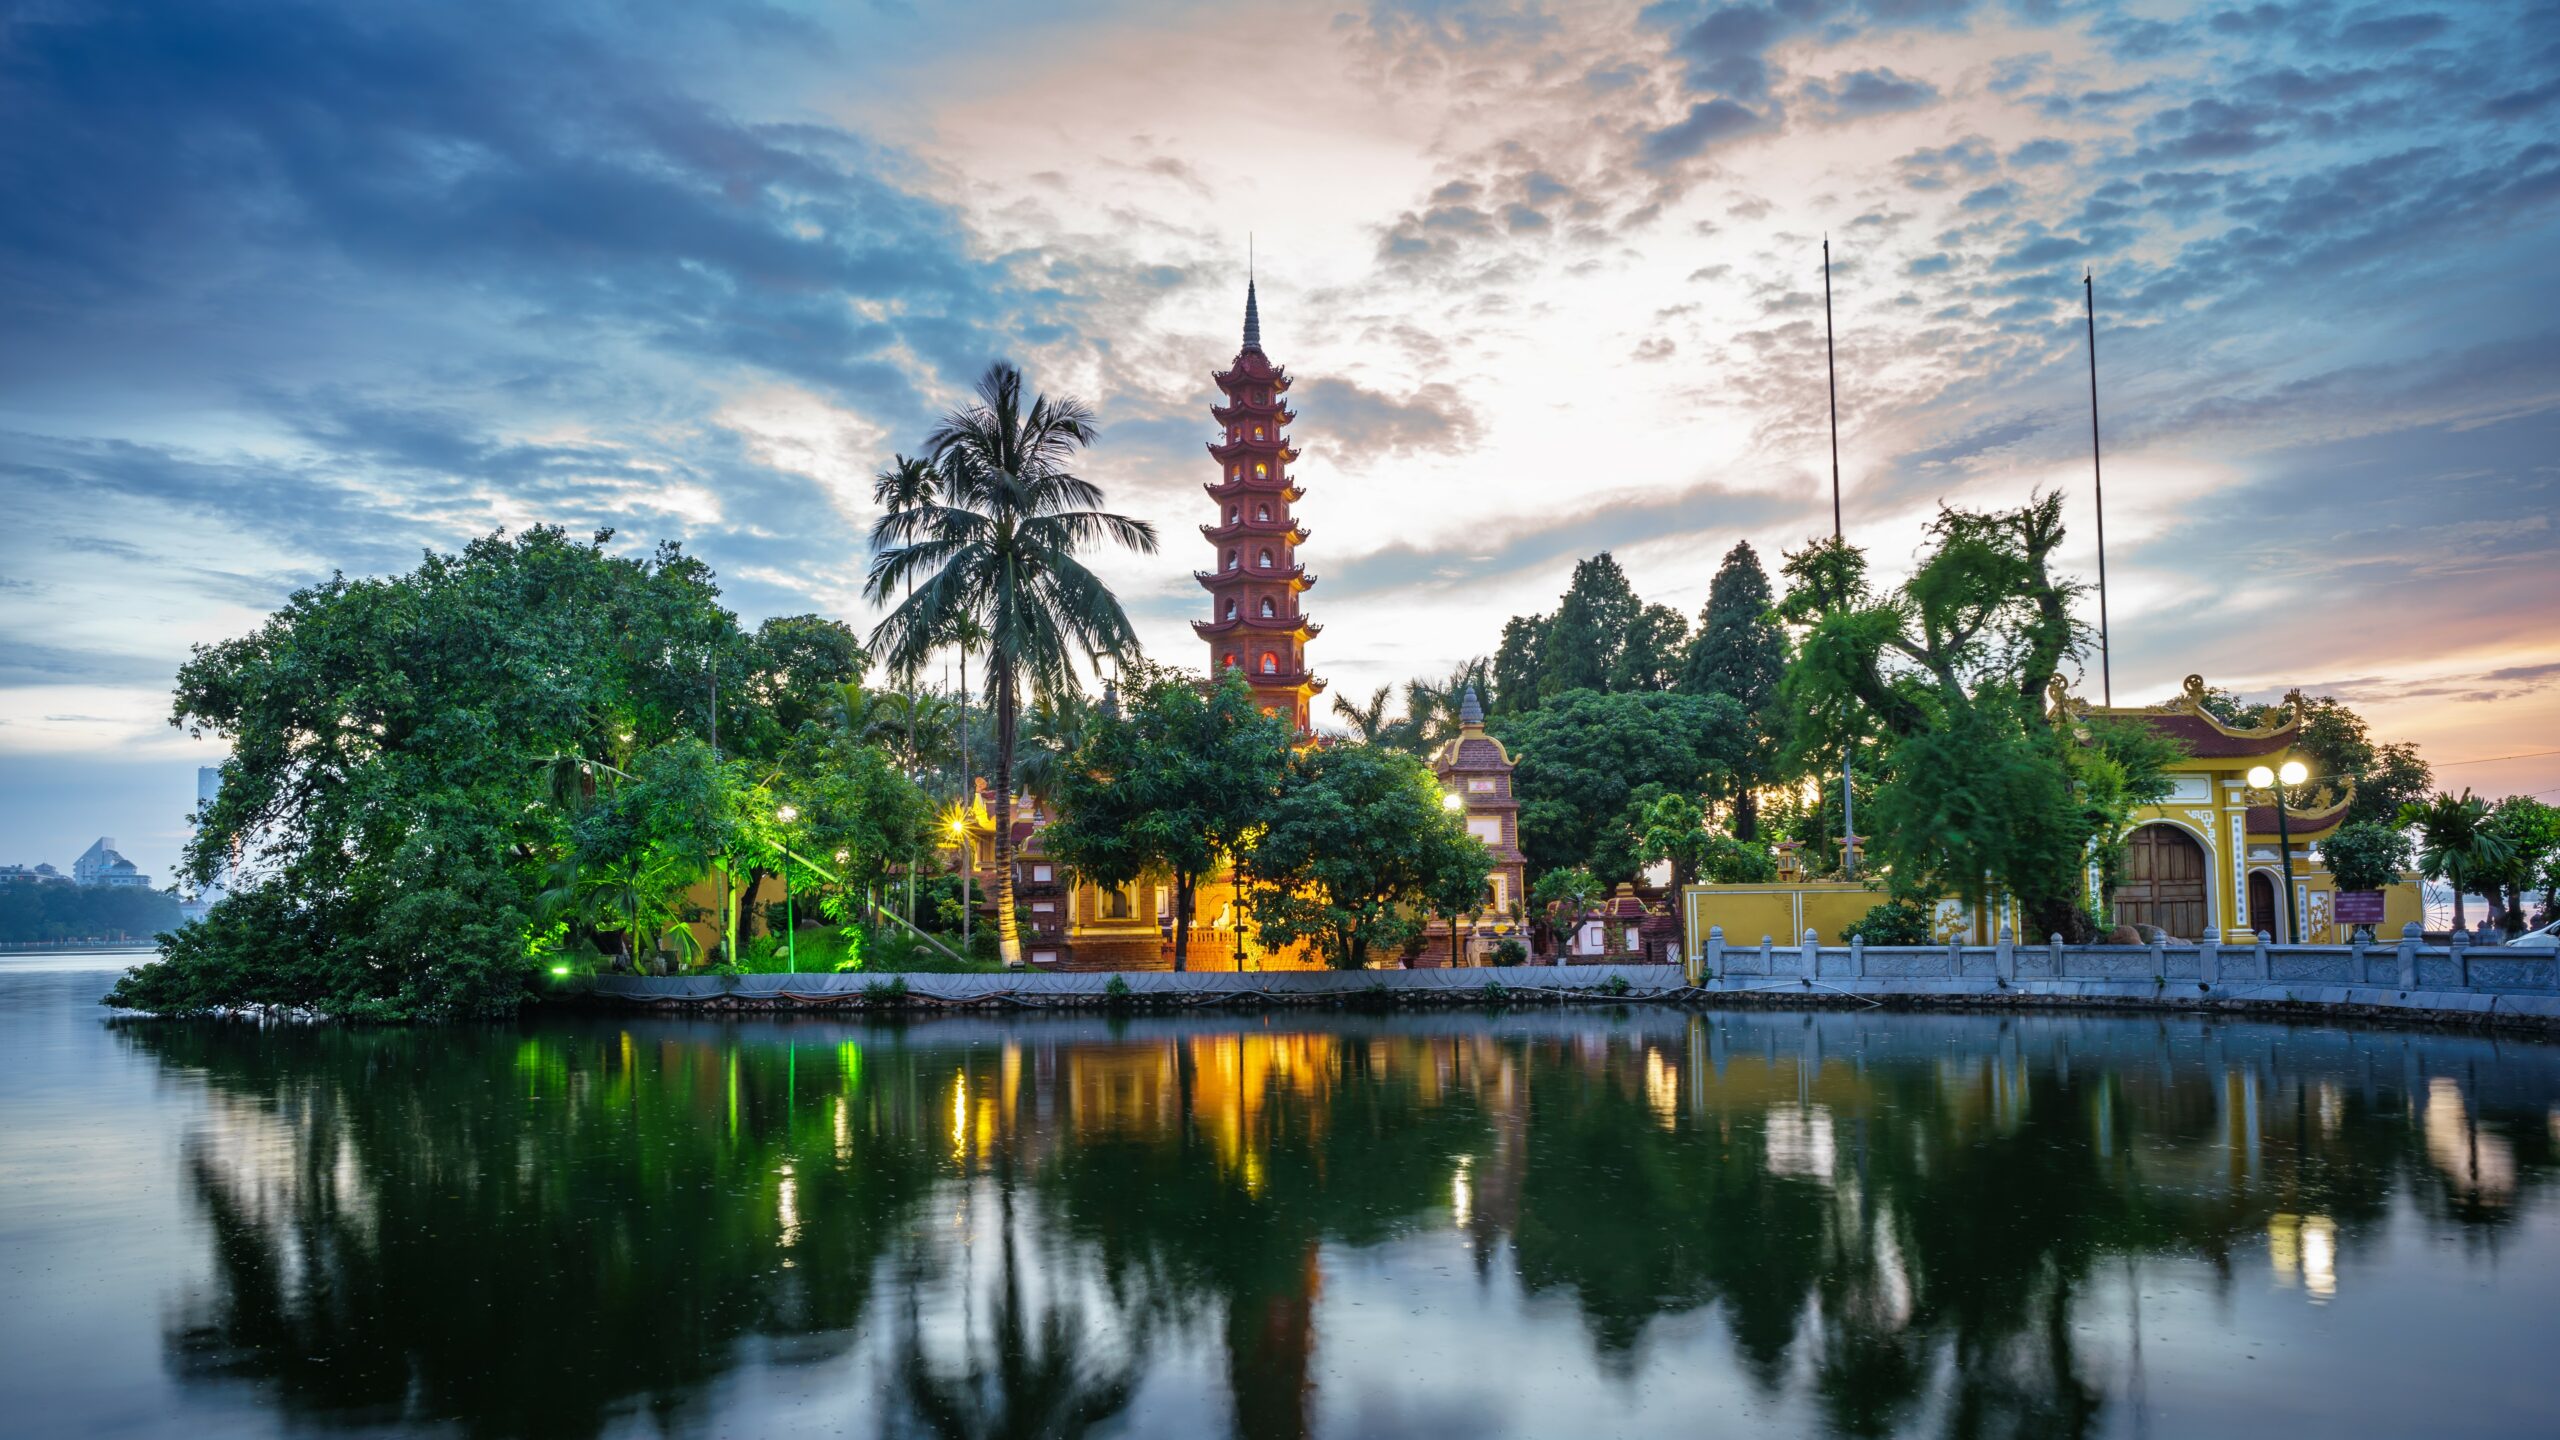 Vietnam Visa from Singapore Requirements, Processing Time, and Alternatives in 2023